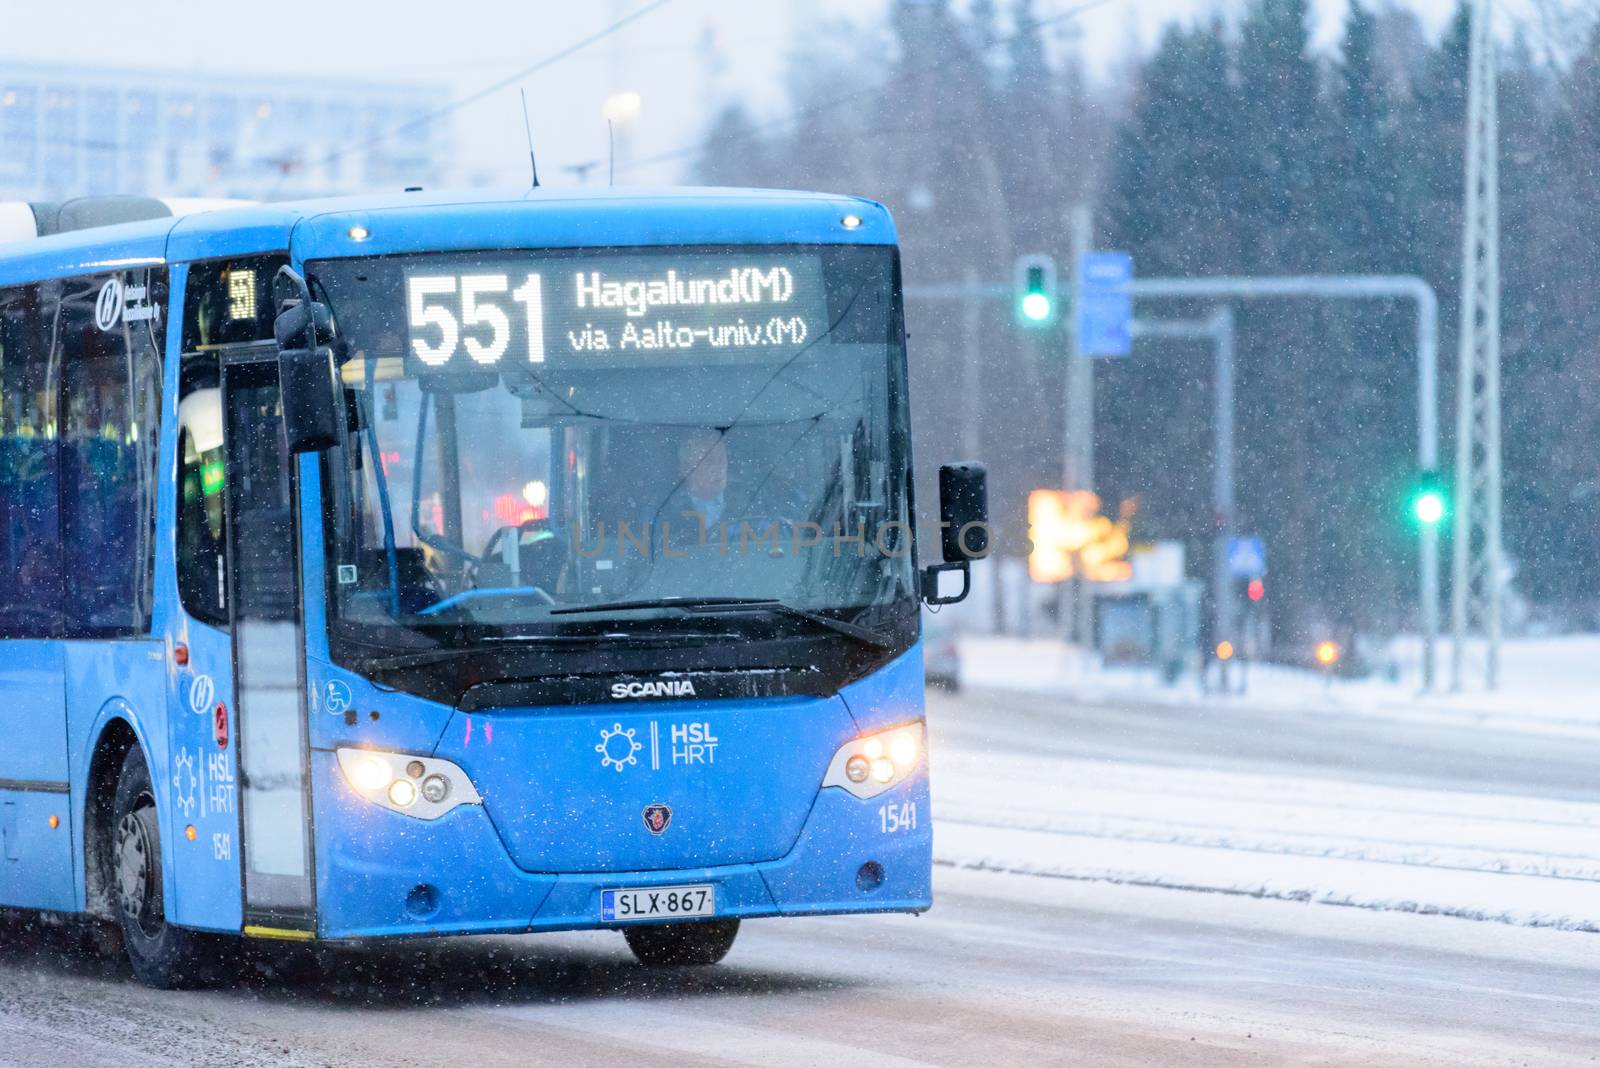 Editorial: Helsinki City, Finland, 21th December 2018. Bus on the road with snow in winter season at Helsinki, Finland.